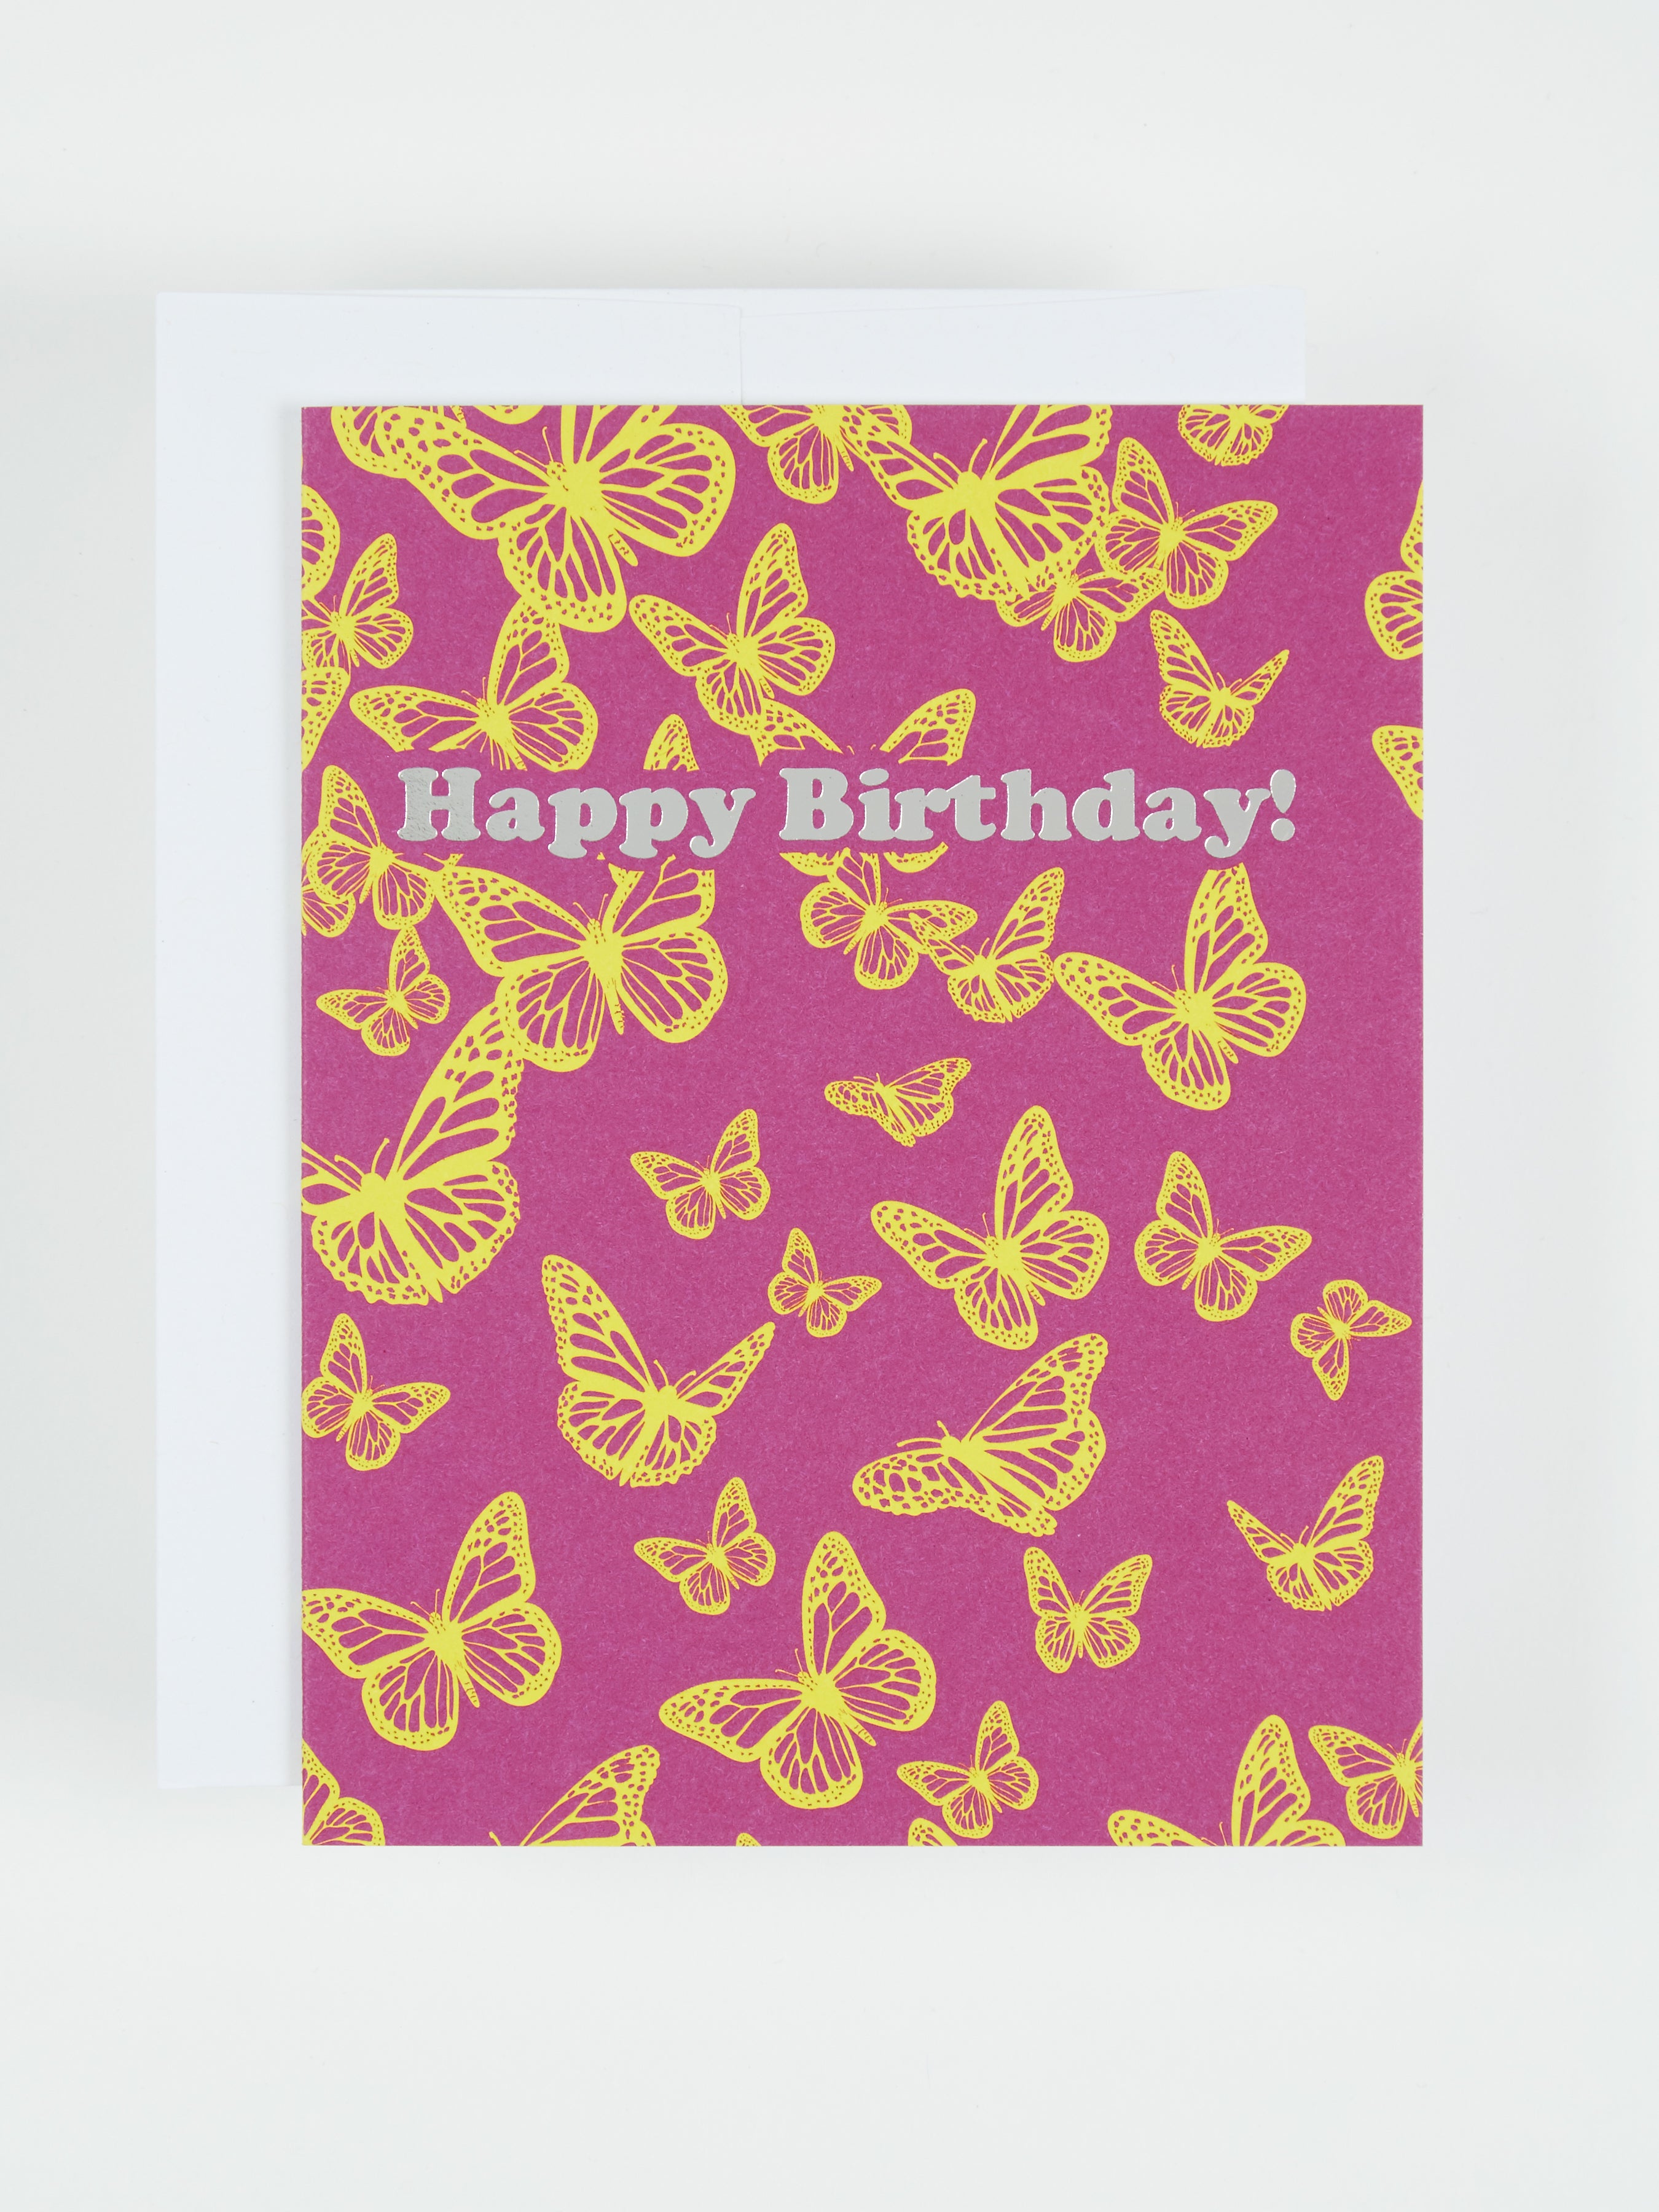 Greeting card with the text Happy Birthday! and butterflies